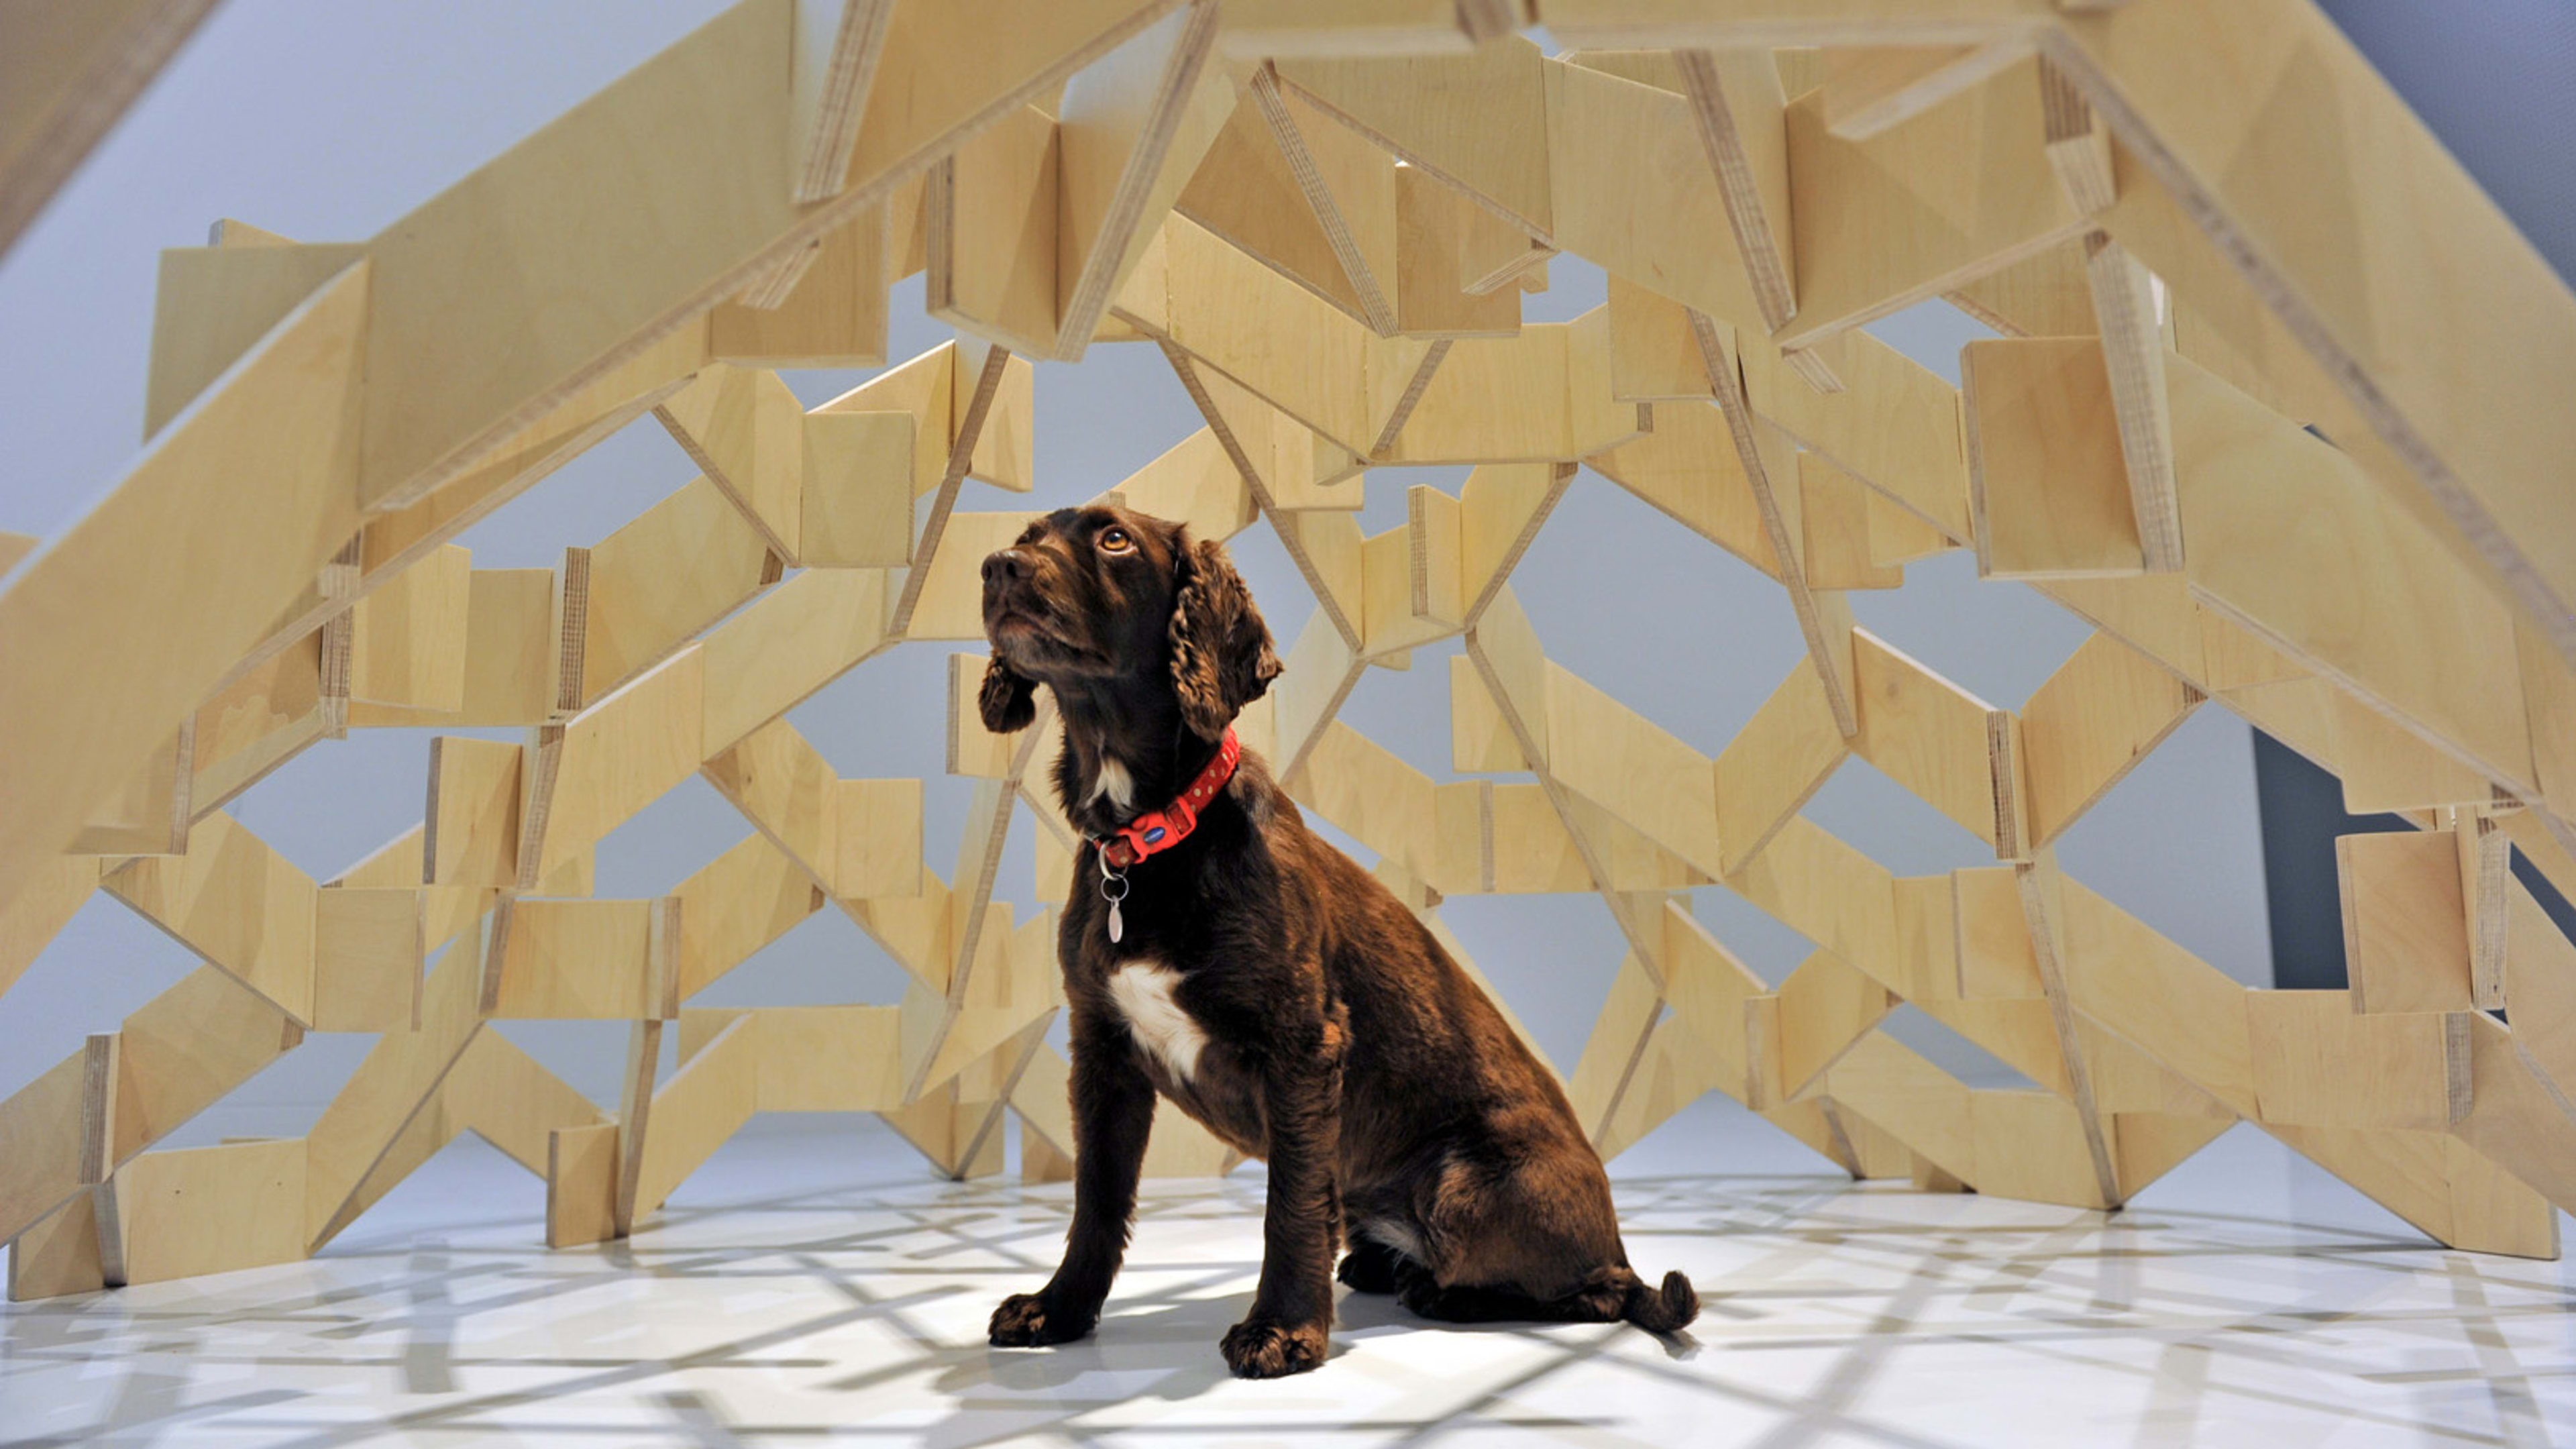 Your dog is ready for a change of scenery too. Here are 16 DIY designs to upgrade their home